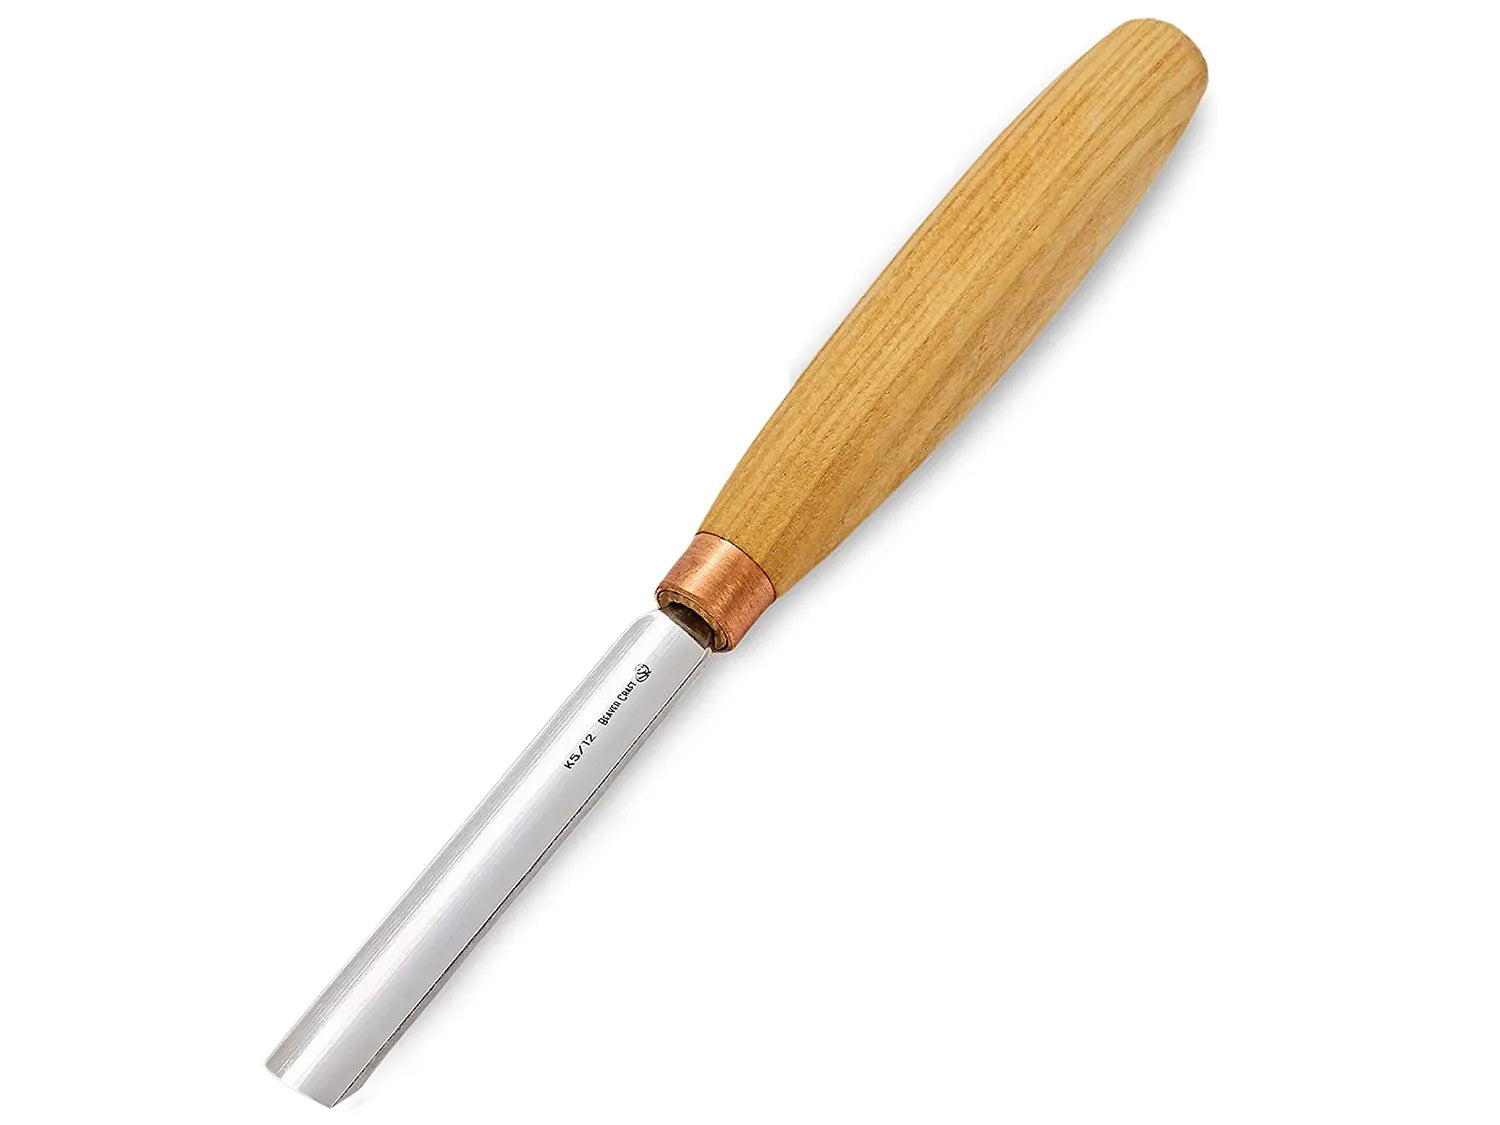 BeaverCraft Wood Carving Gouge K9/10 Woodworking Hand Chisel Compact Wood Carving Knife for Beginners and Profi, Brown